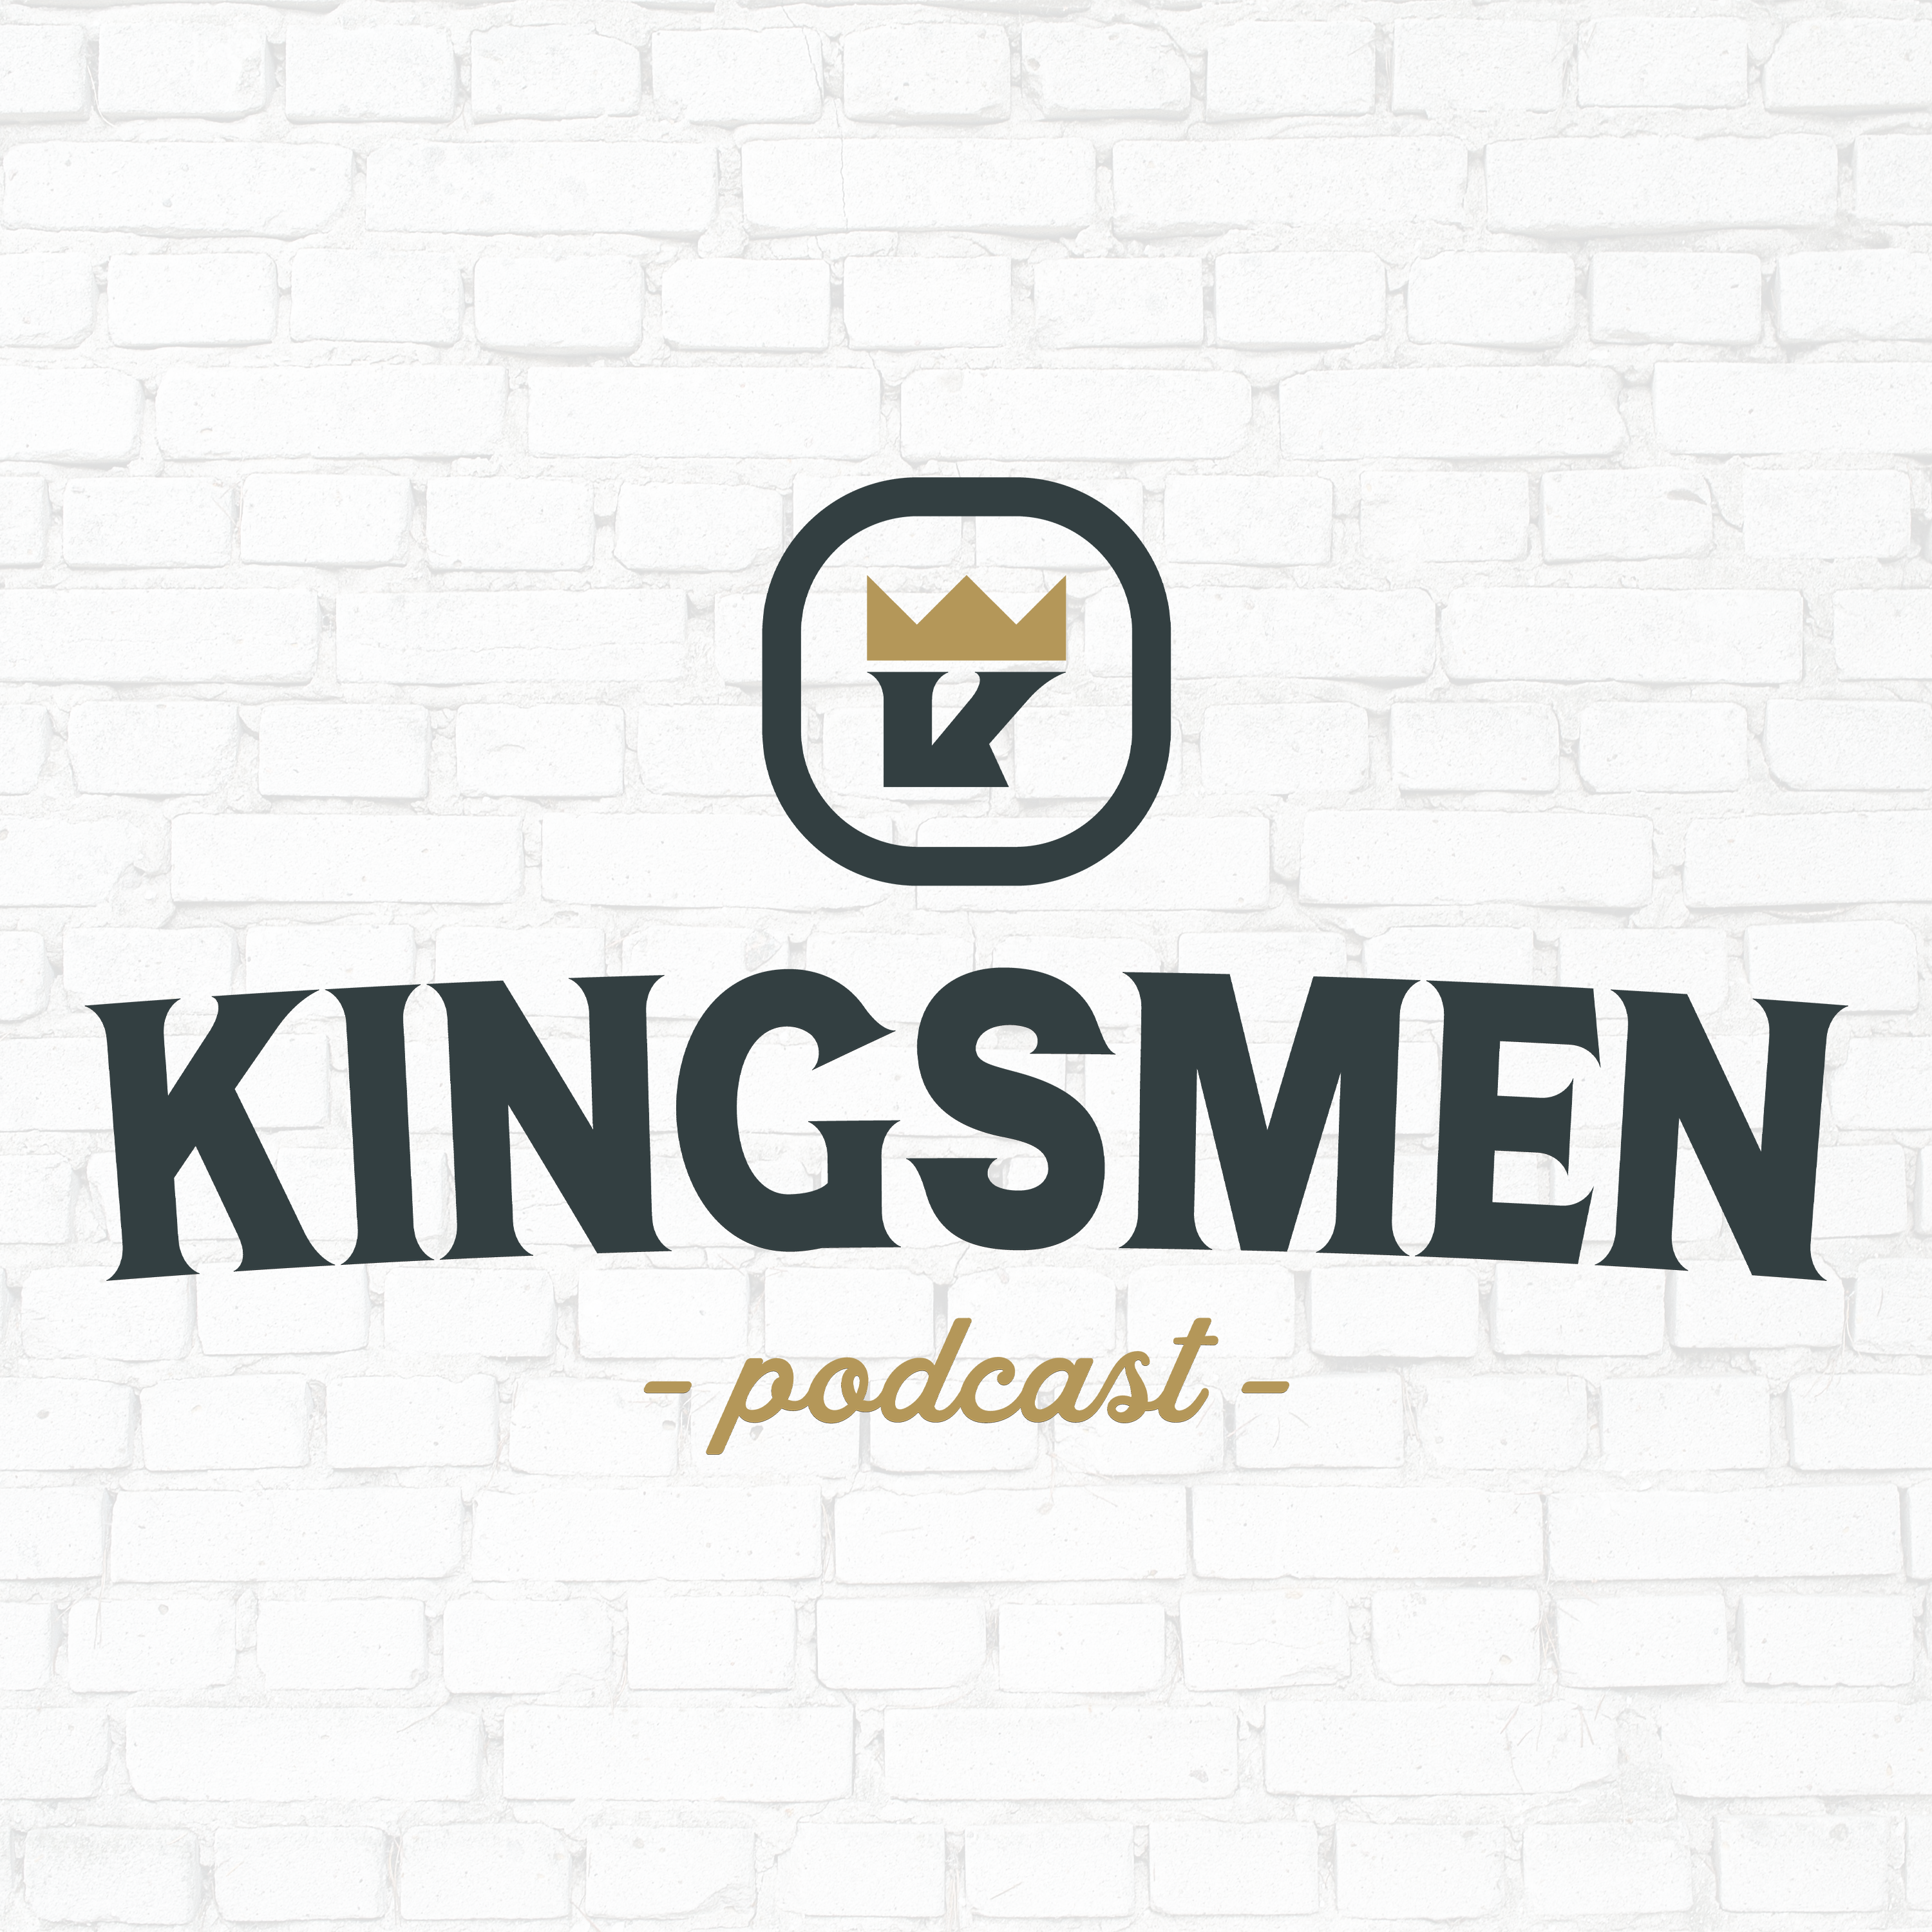 Looking For A Biblical Podcast About Manhood? | Kingsmen Podcast by Theocast